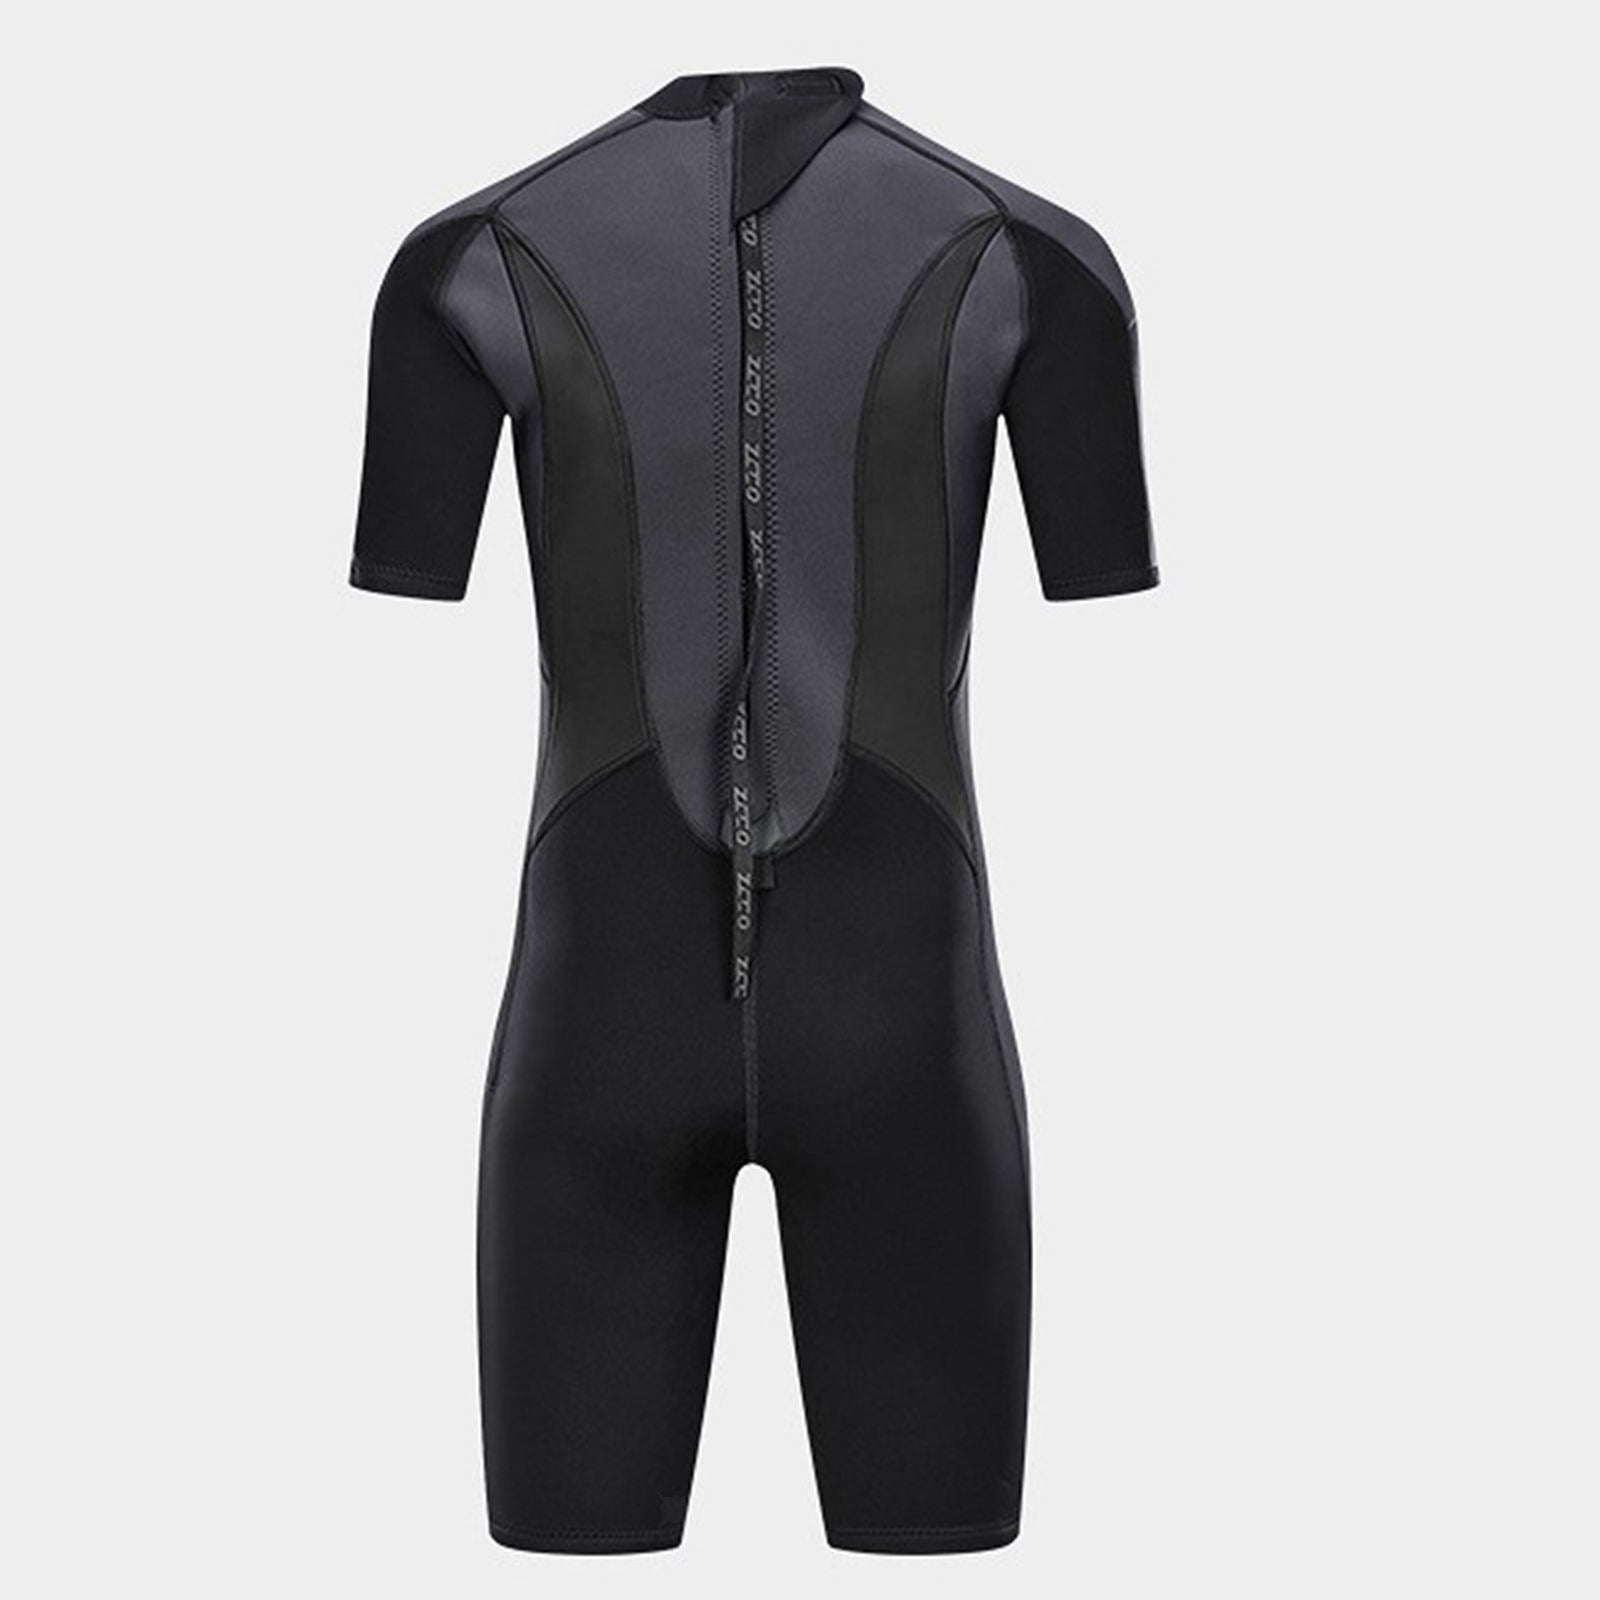 Mens 3mm Shorty Wetsuit Back Zip Dive Skin for Snorkeling Surfing Suits L